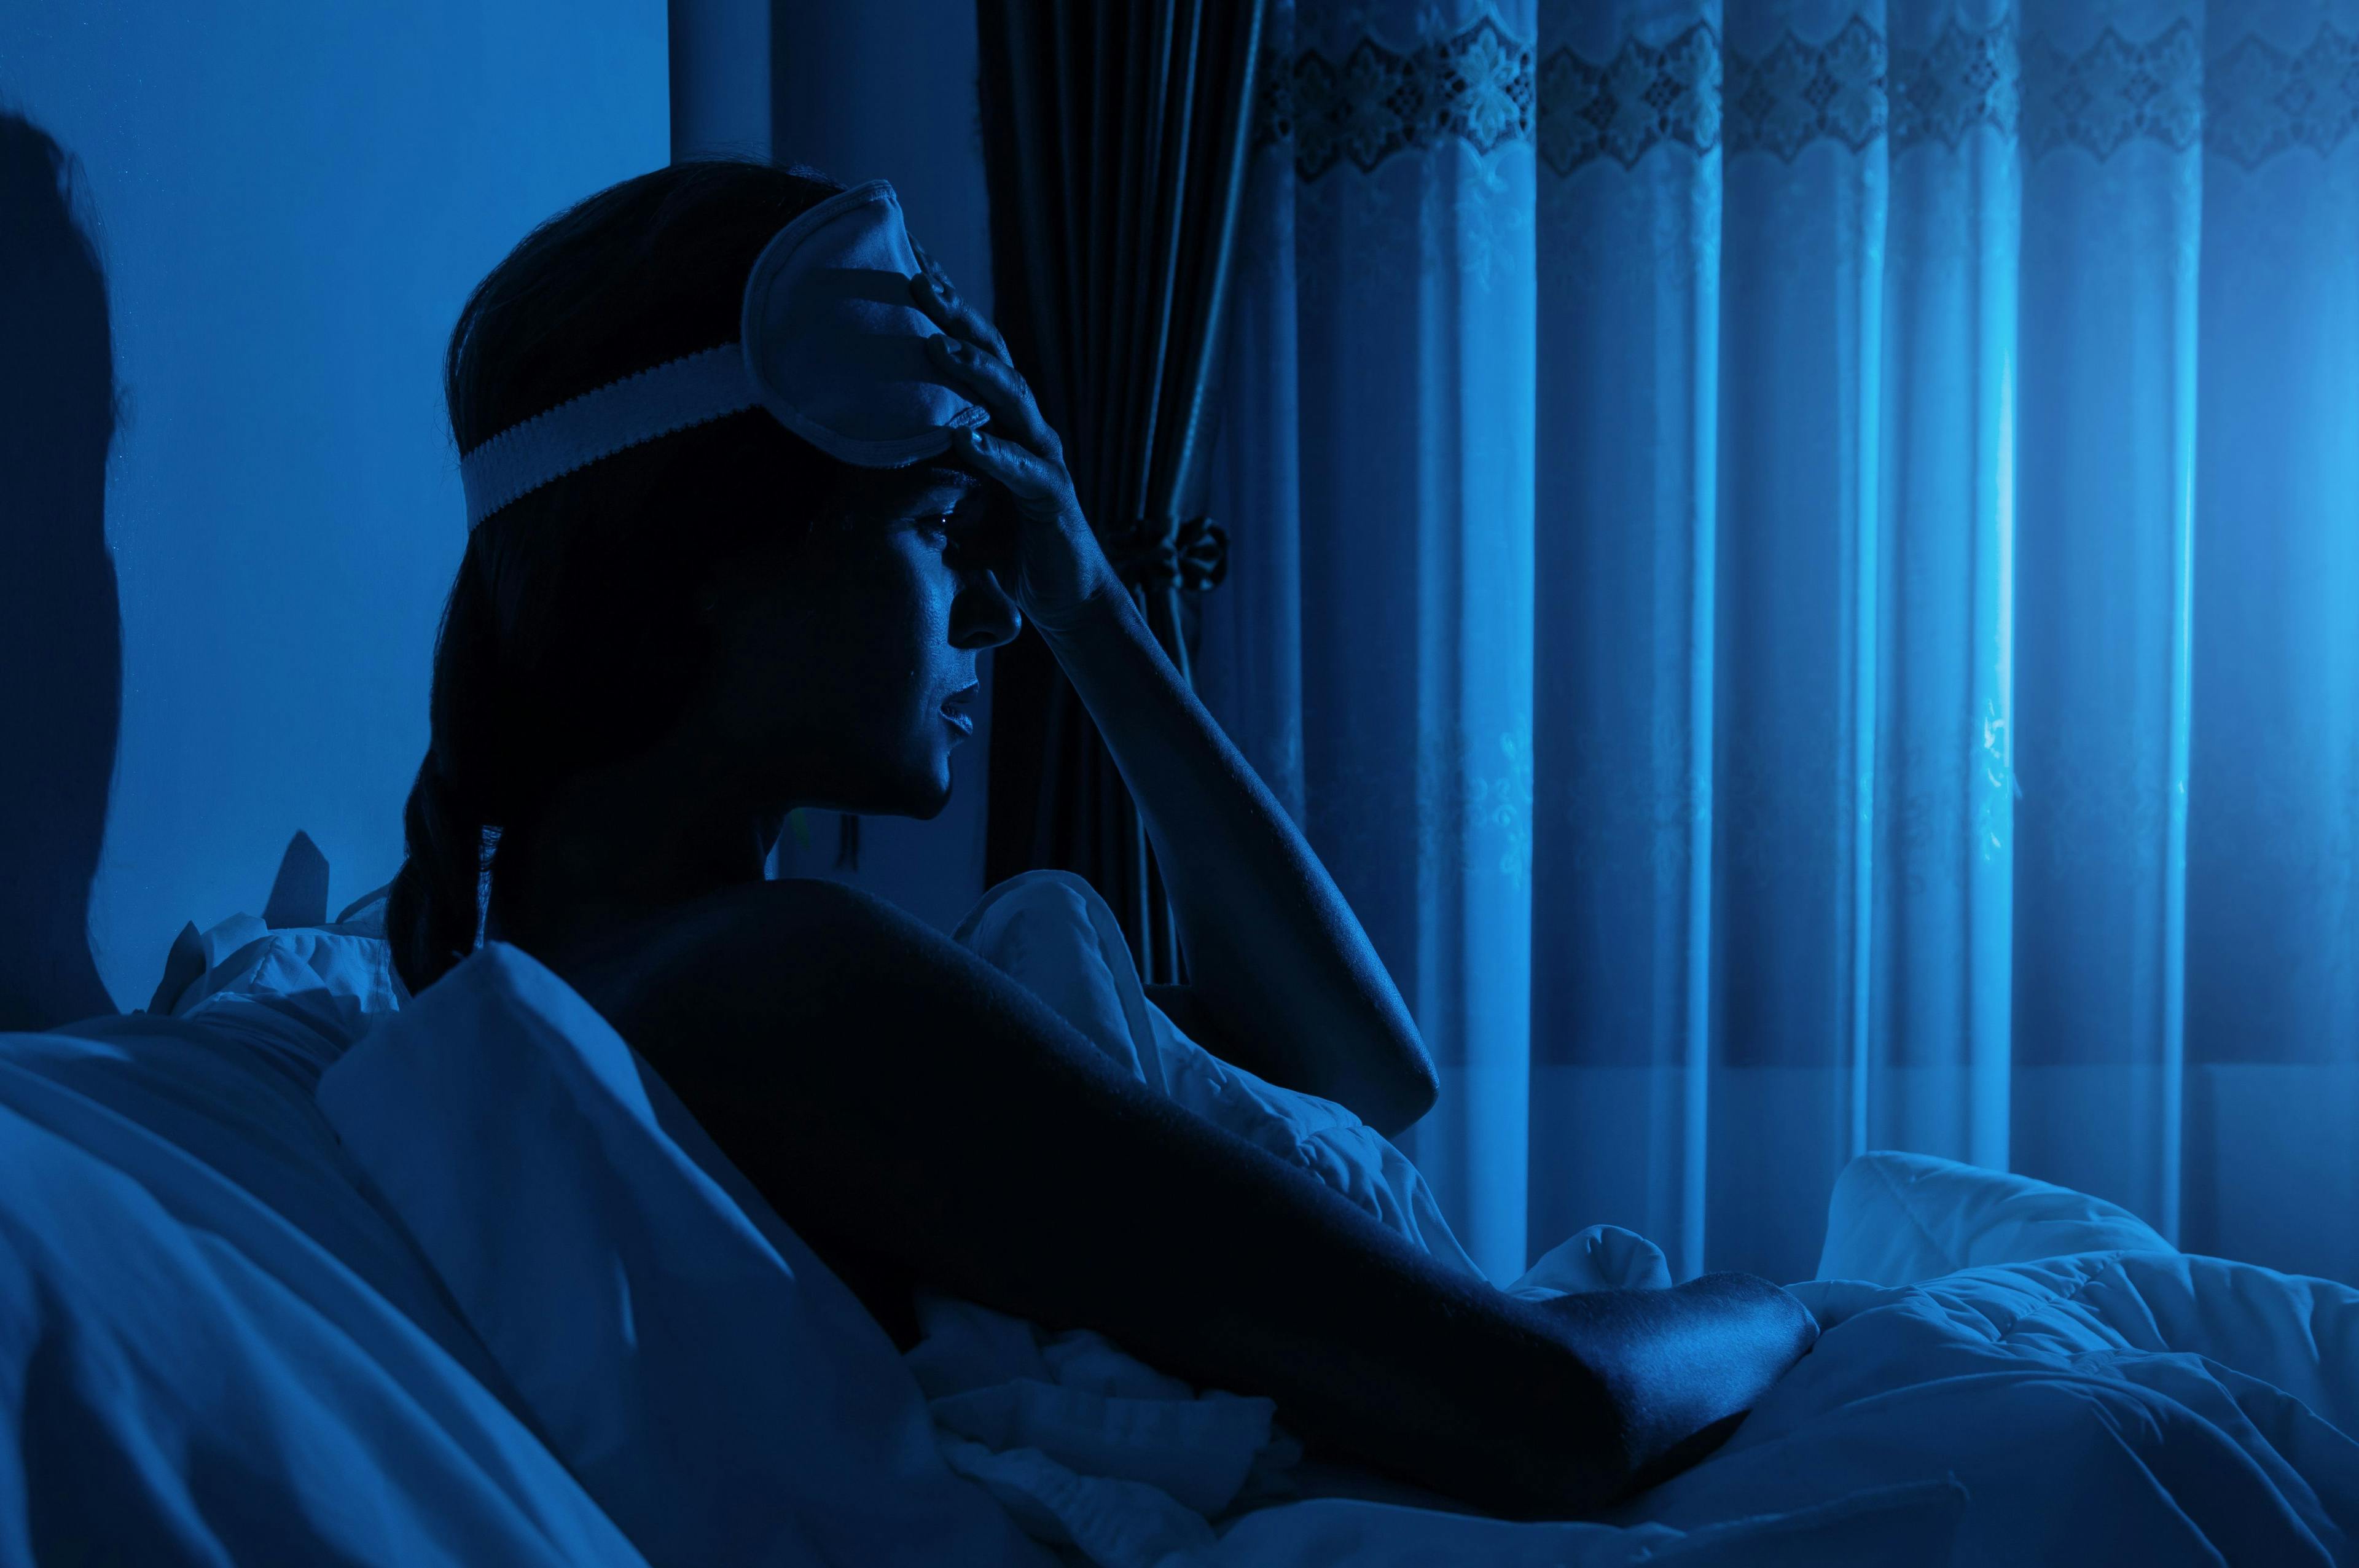 Researchers investigated sleep disturbances in individuals at ultra-high risk of psychosis.